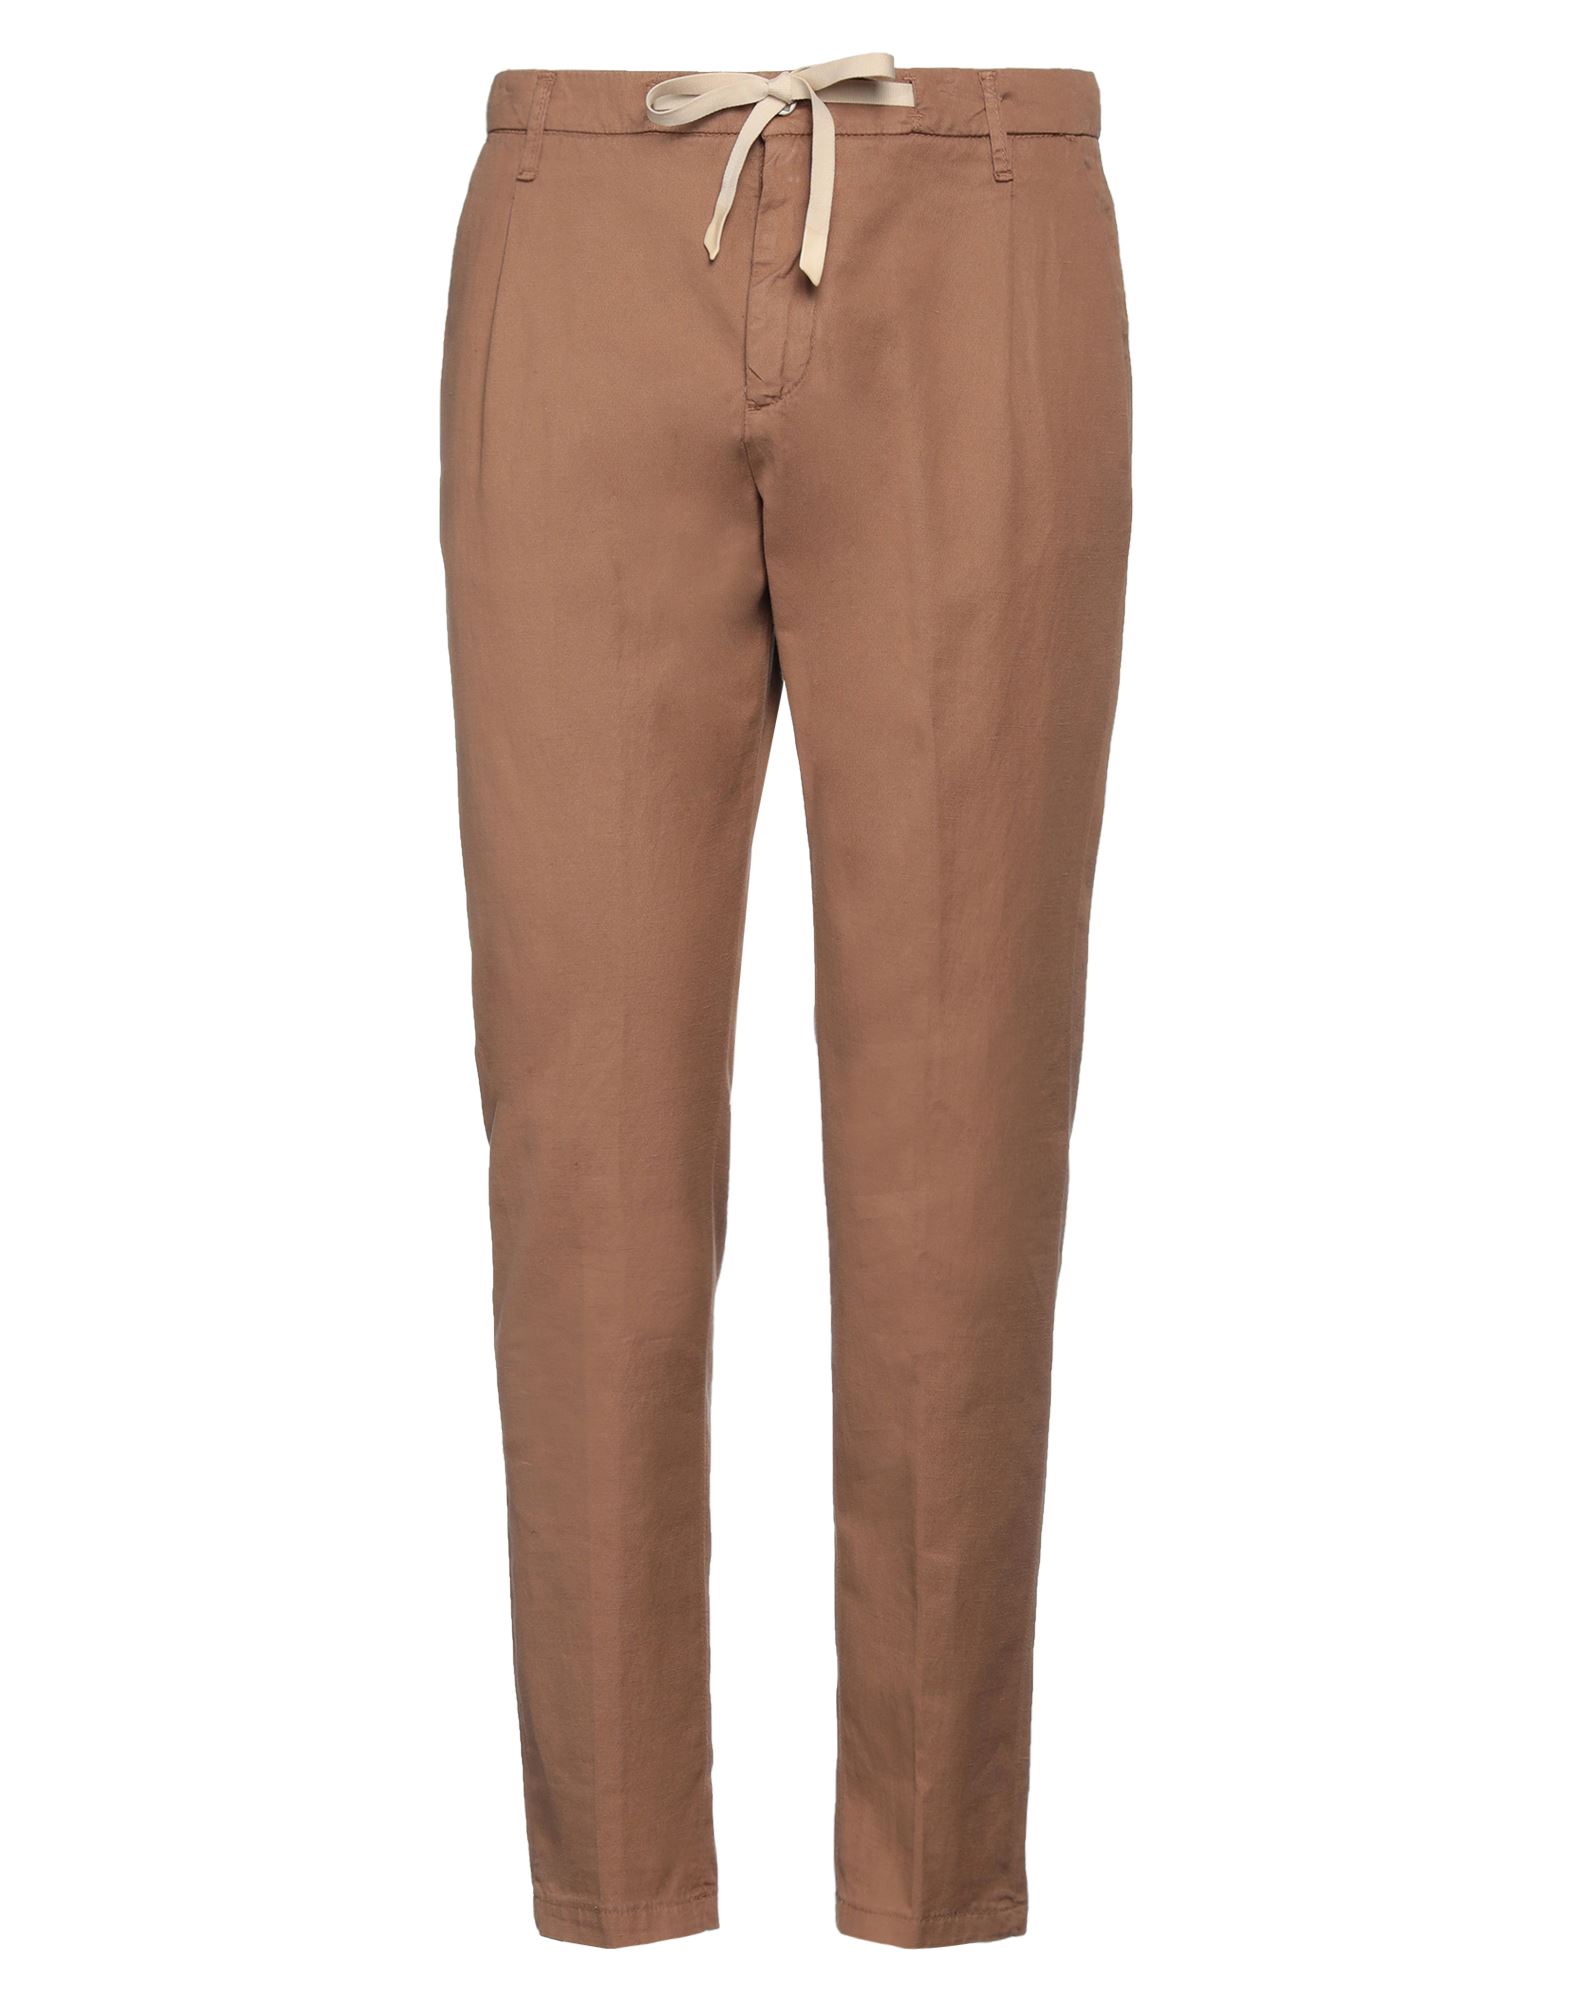 Squad² Pants In Camel